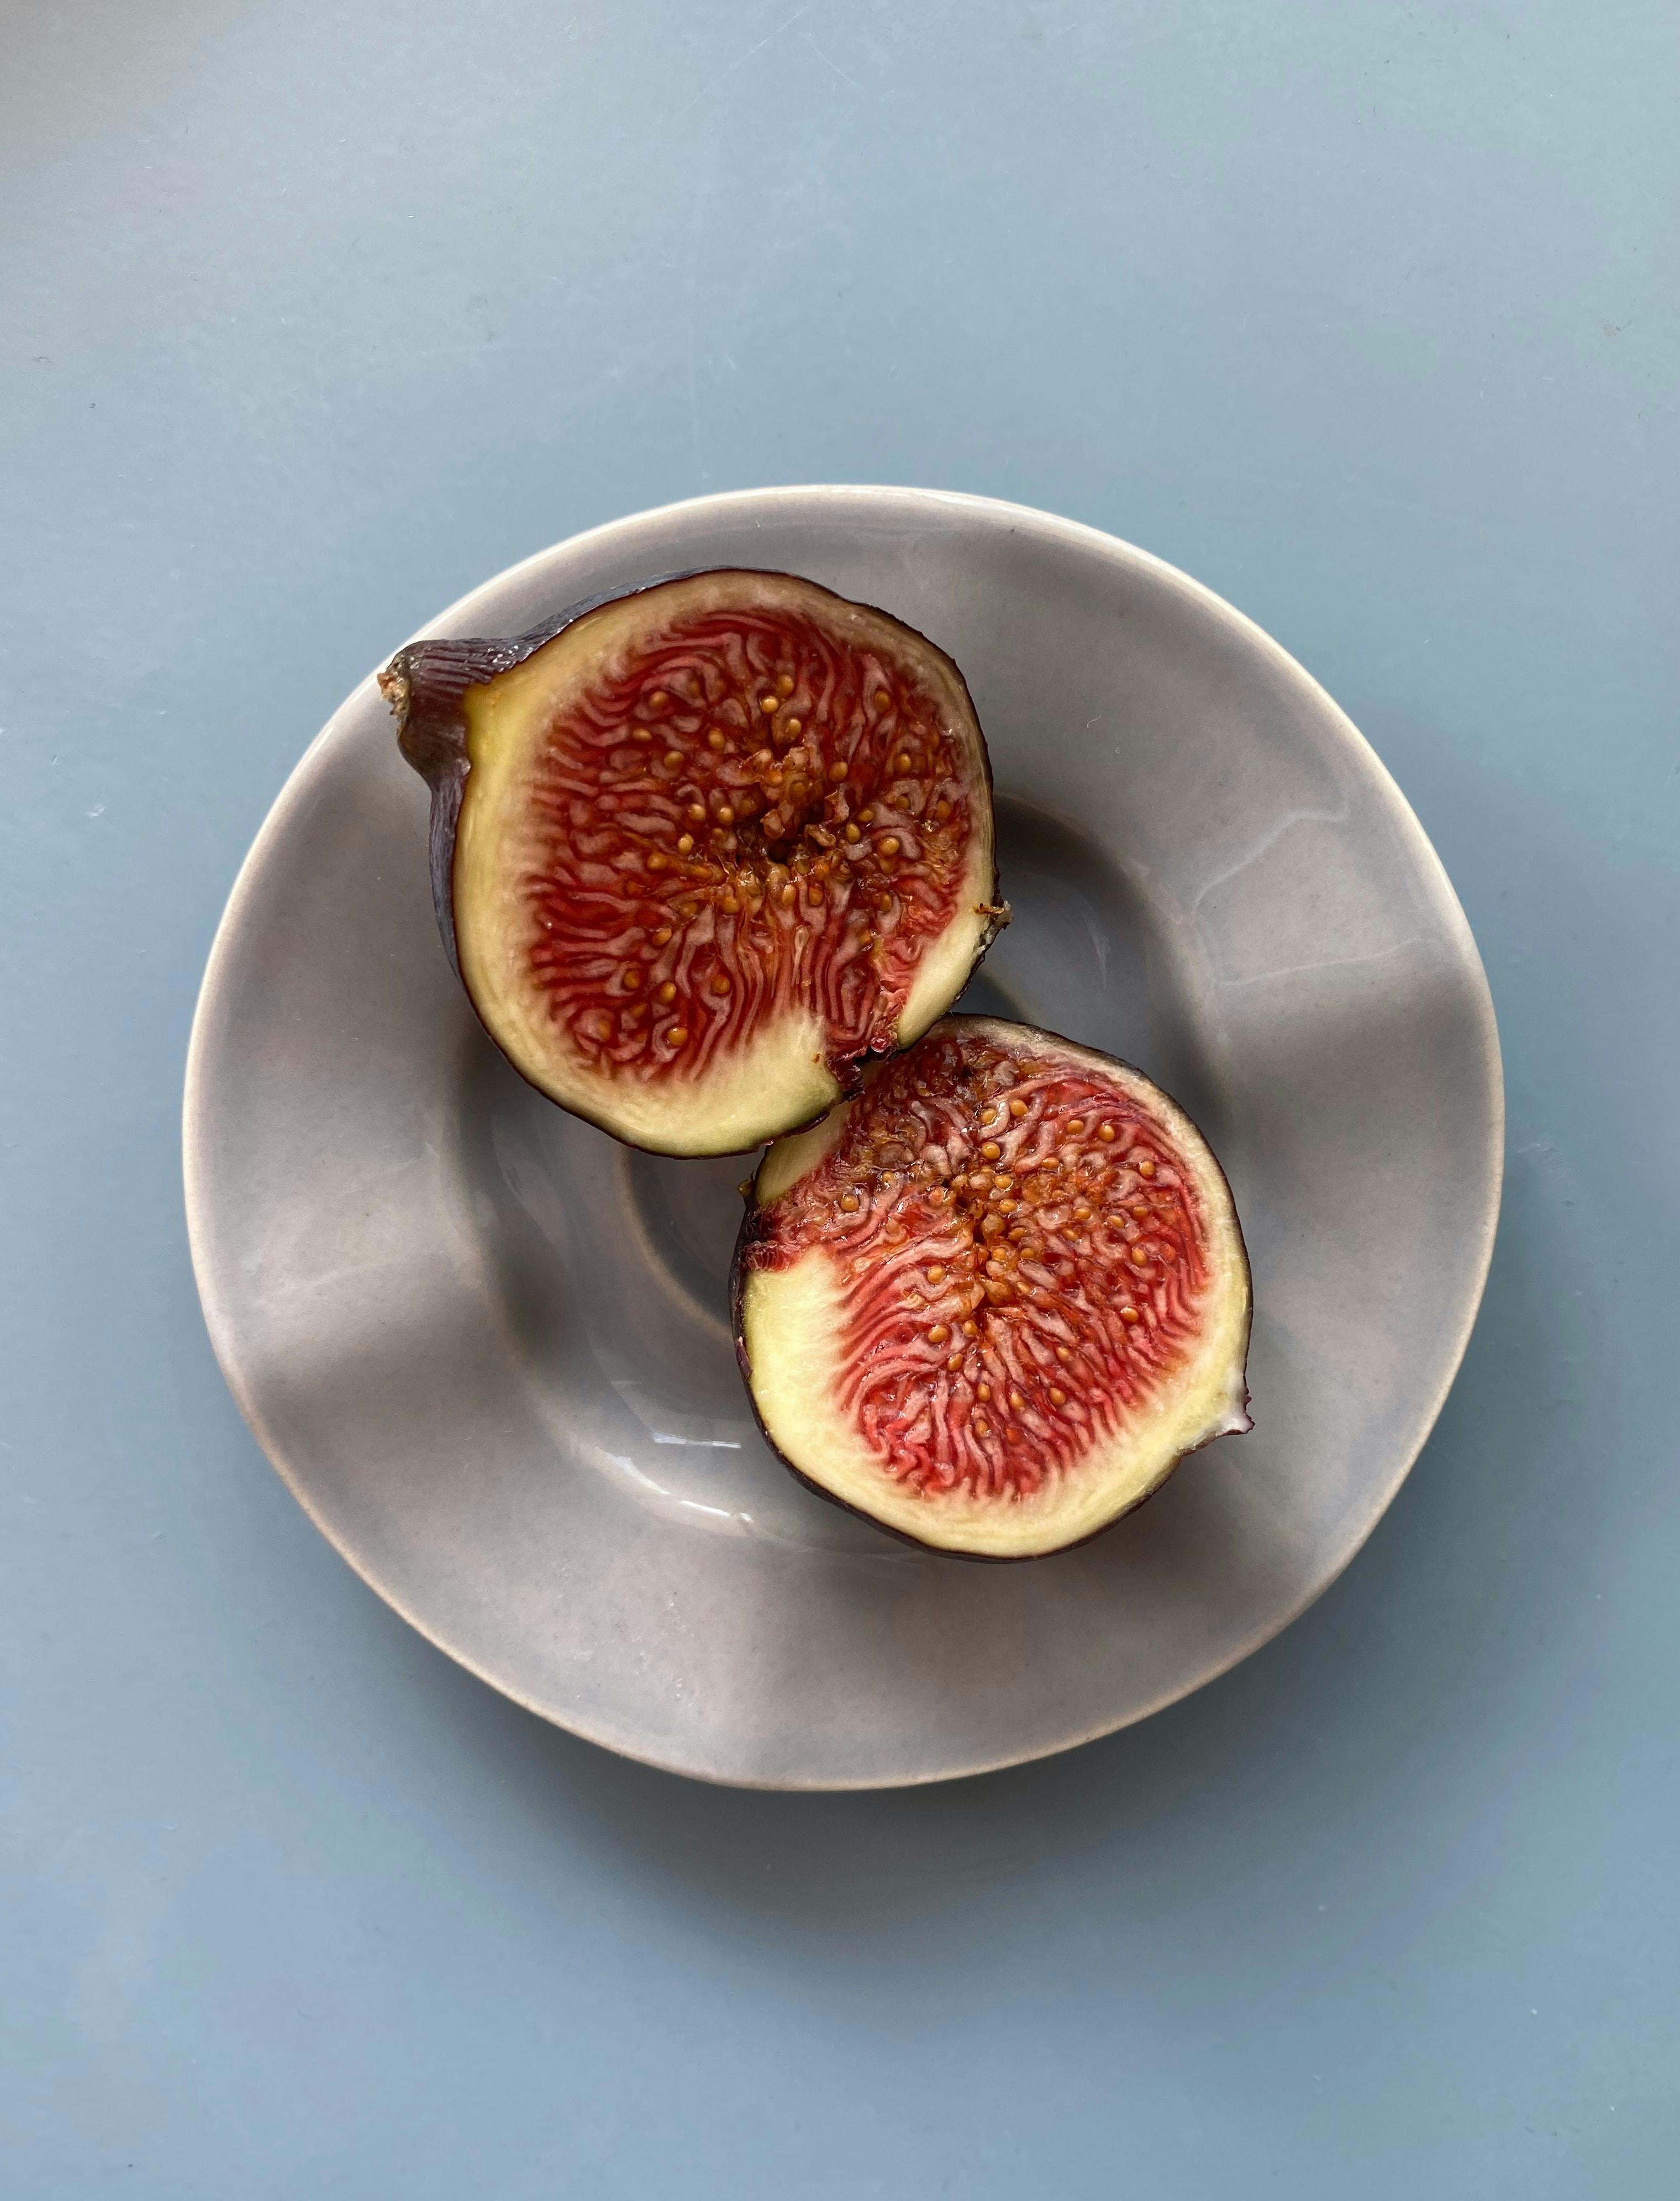 Are there dead wasps in figs? How figs are grown